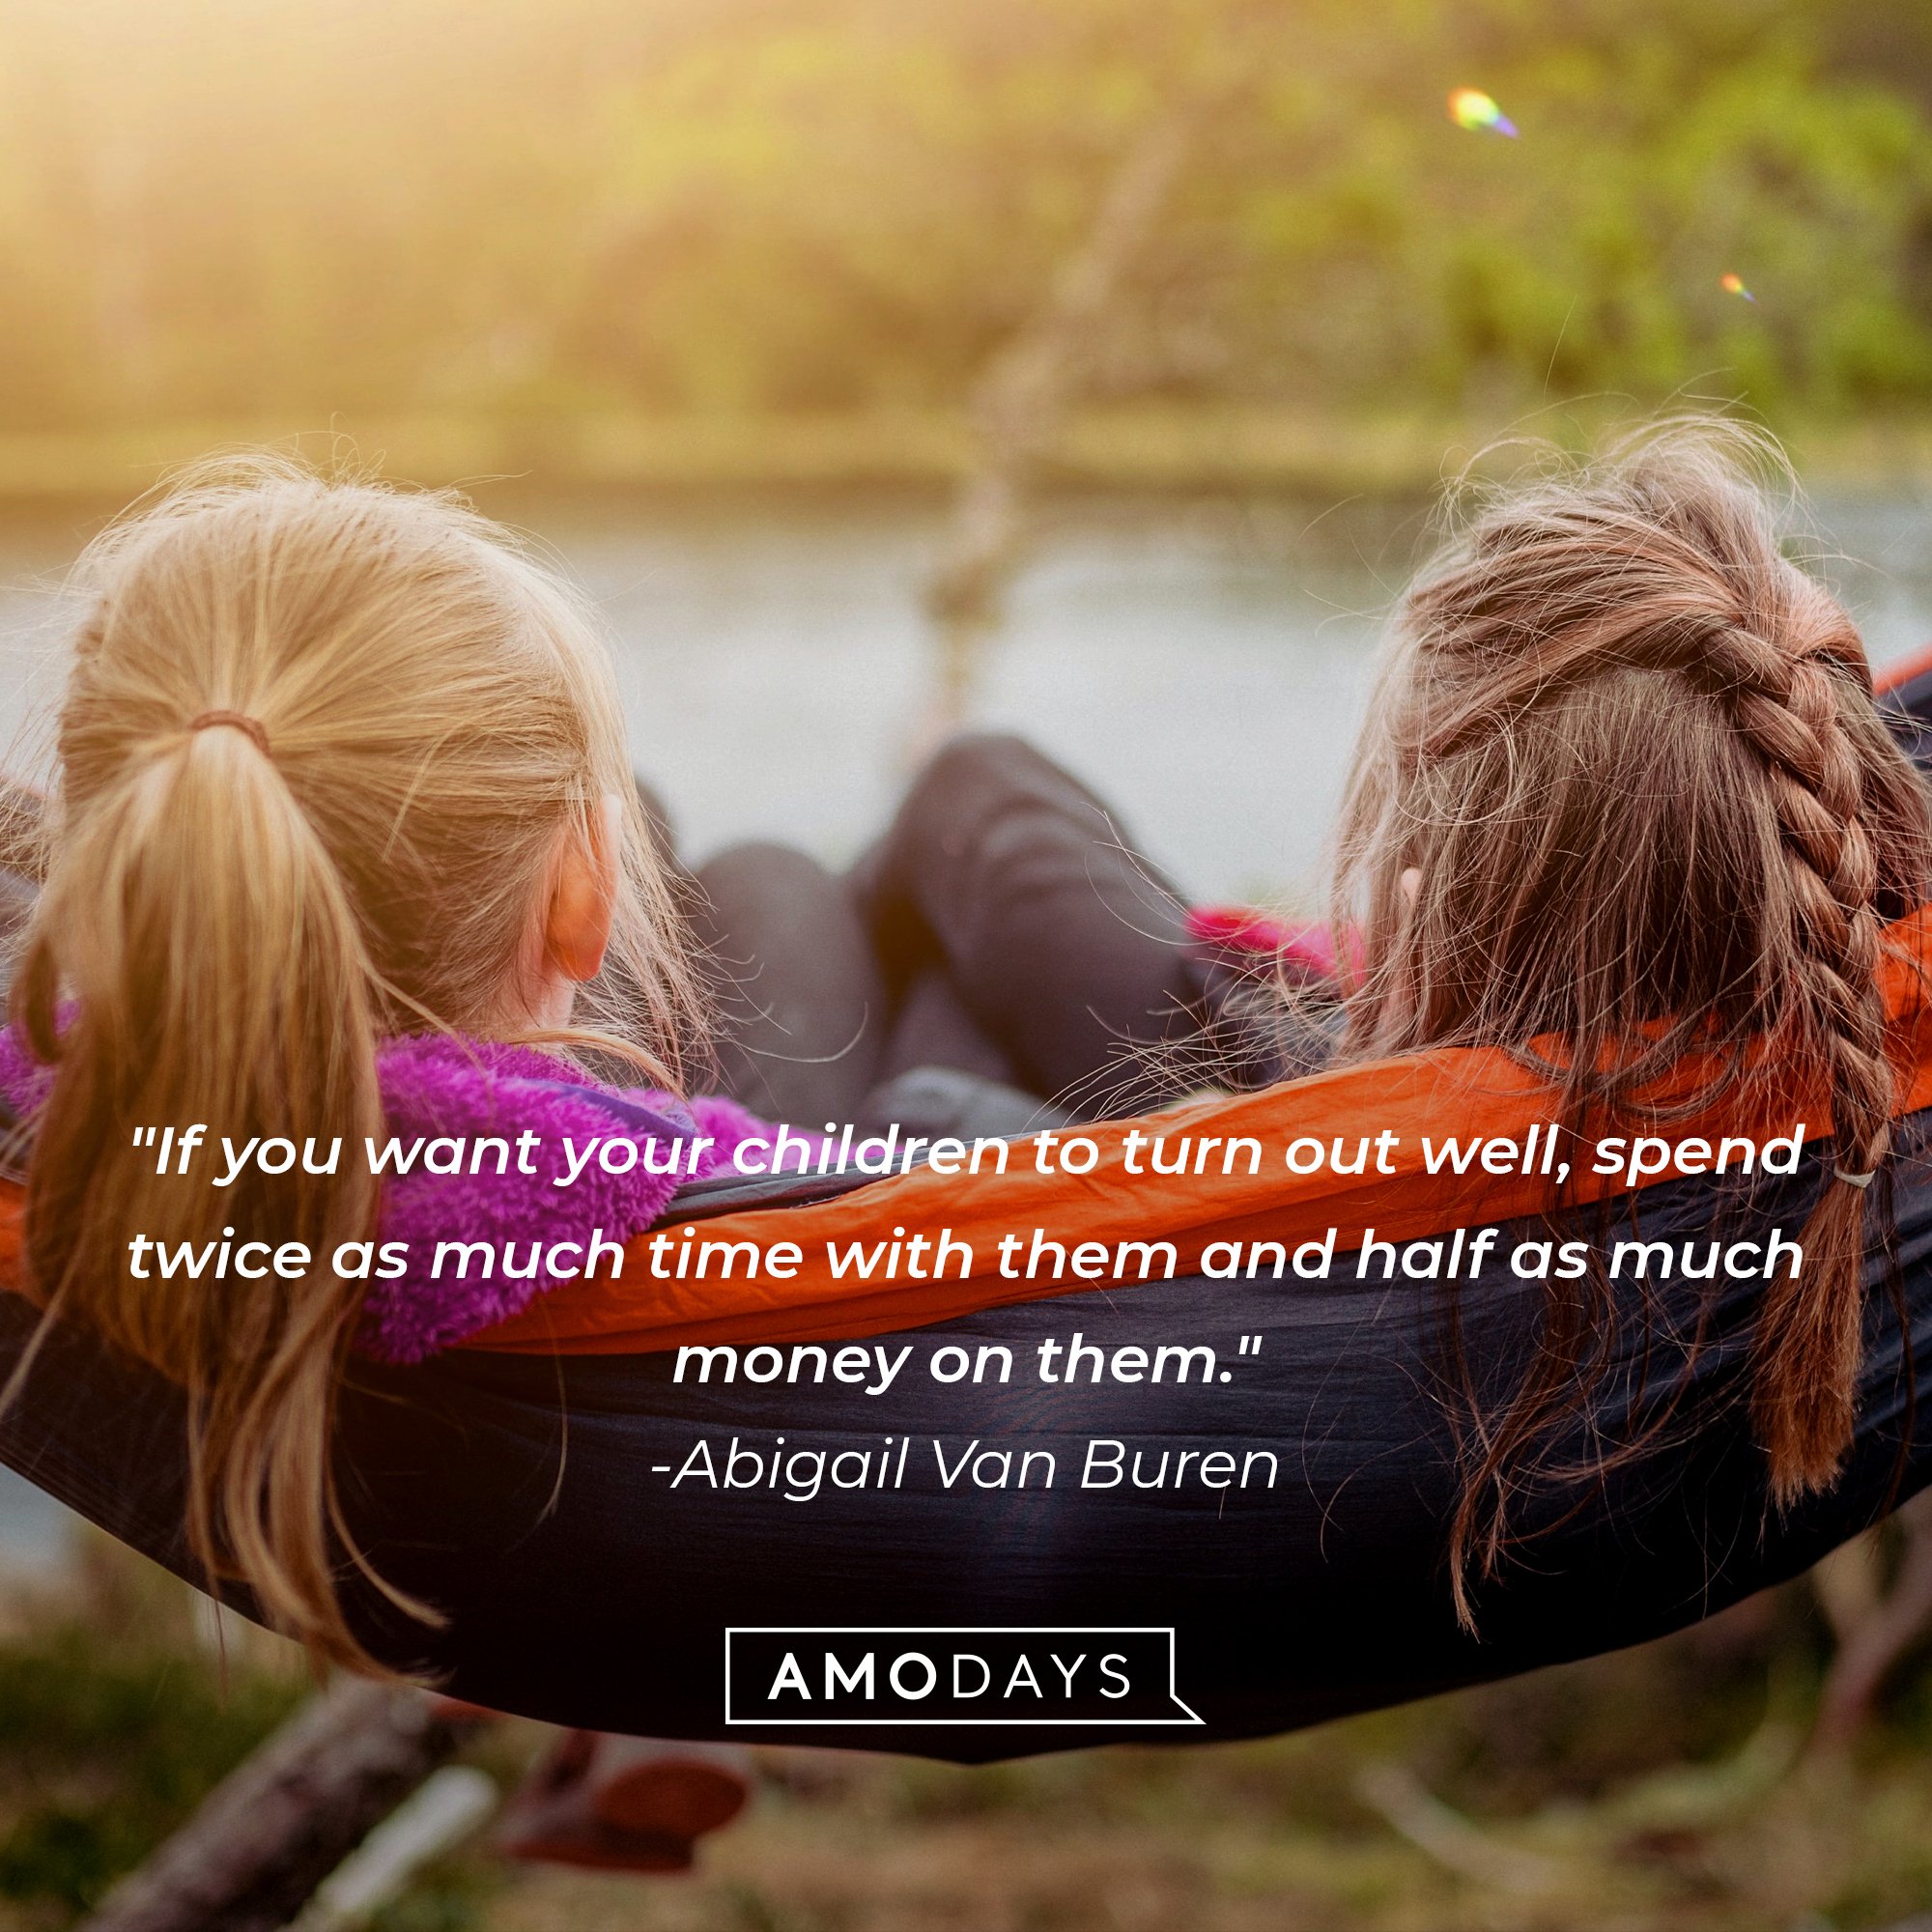 Abigail Van Buren 's quote: "If you want your children to turn out well, spend twice as much time with them and half as much money on them." | Image: AmoDays